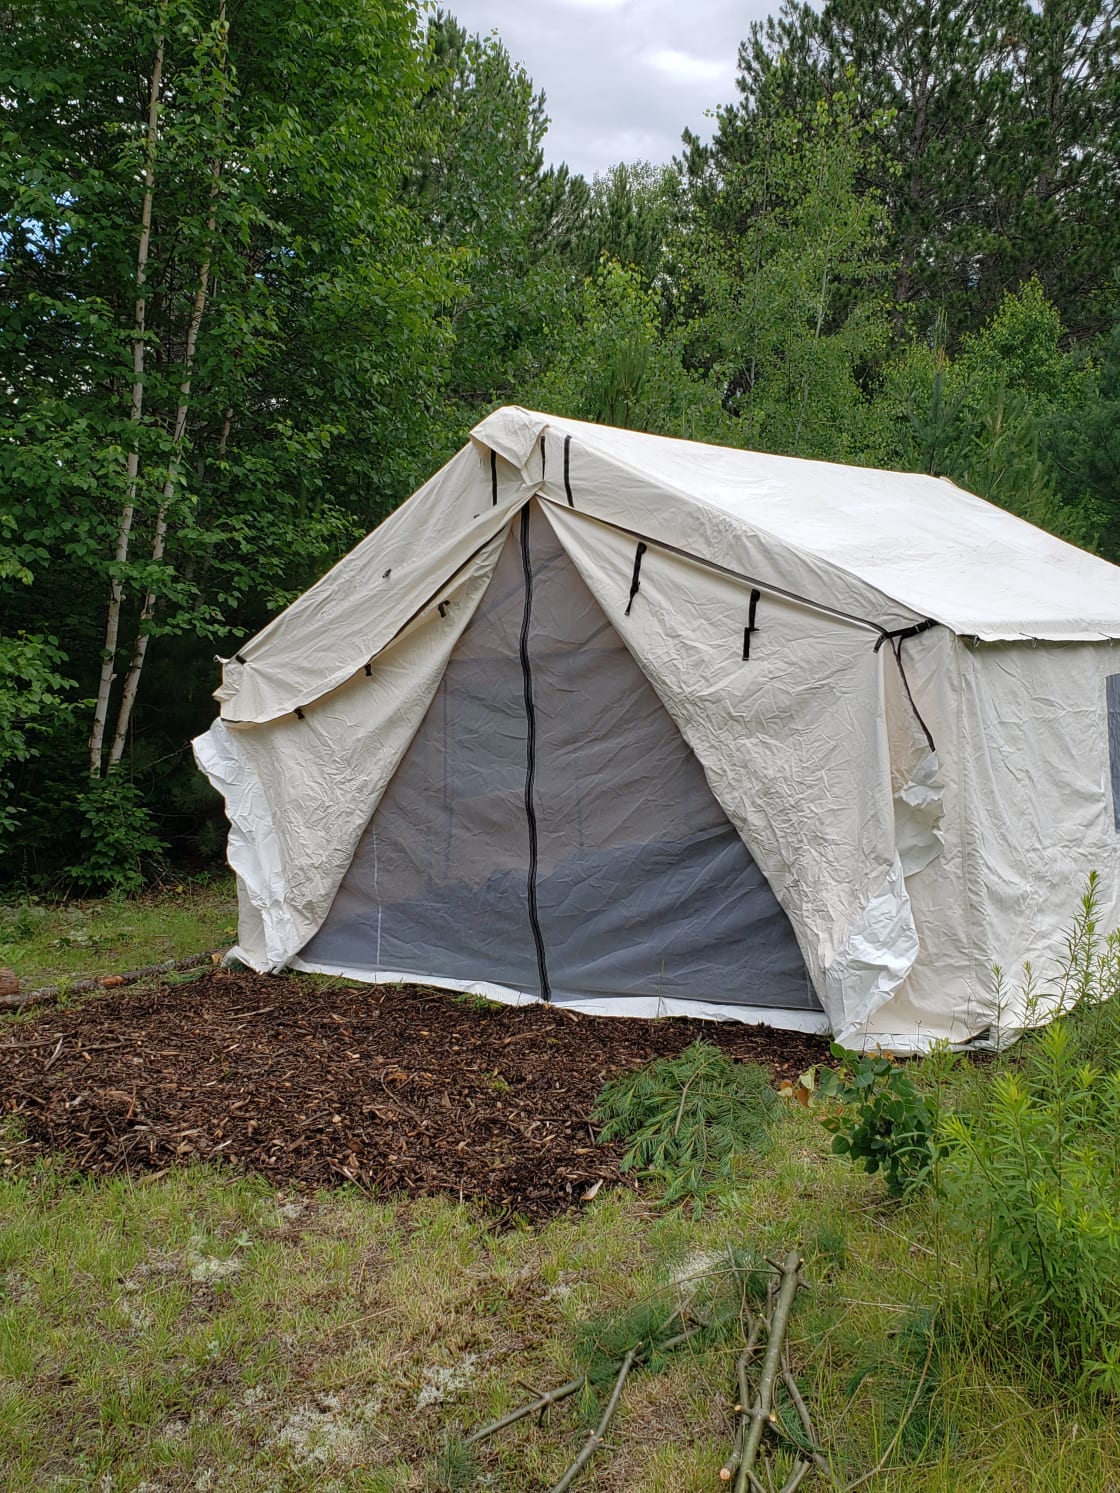 This is the 12 x 14 foot canvas tent